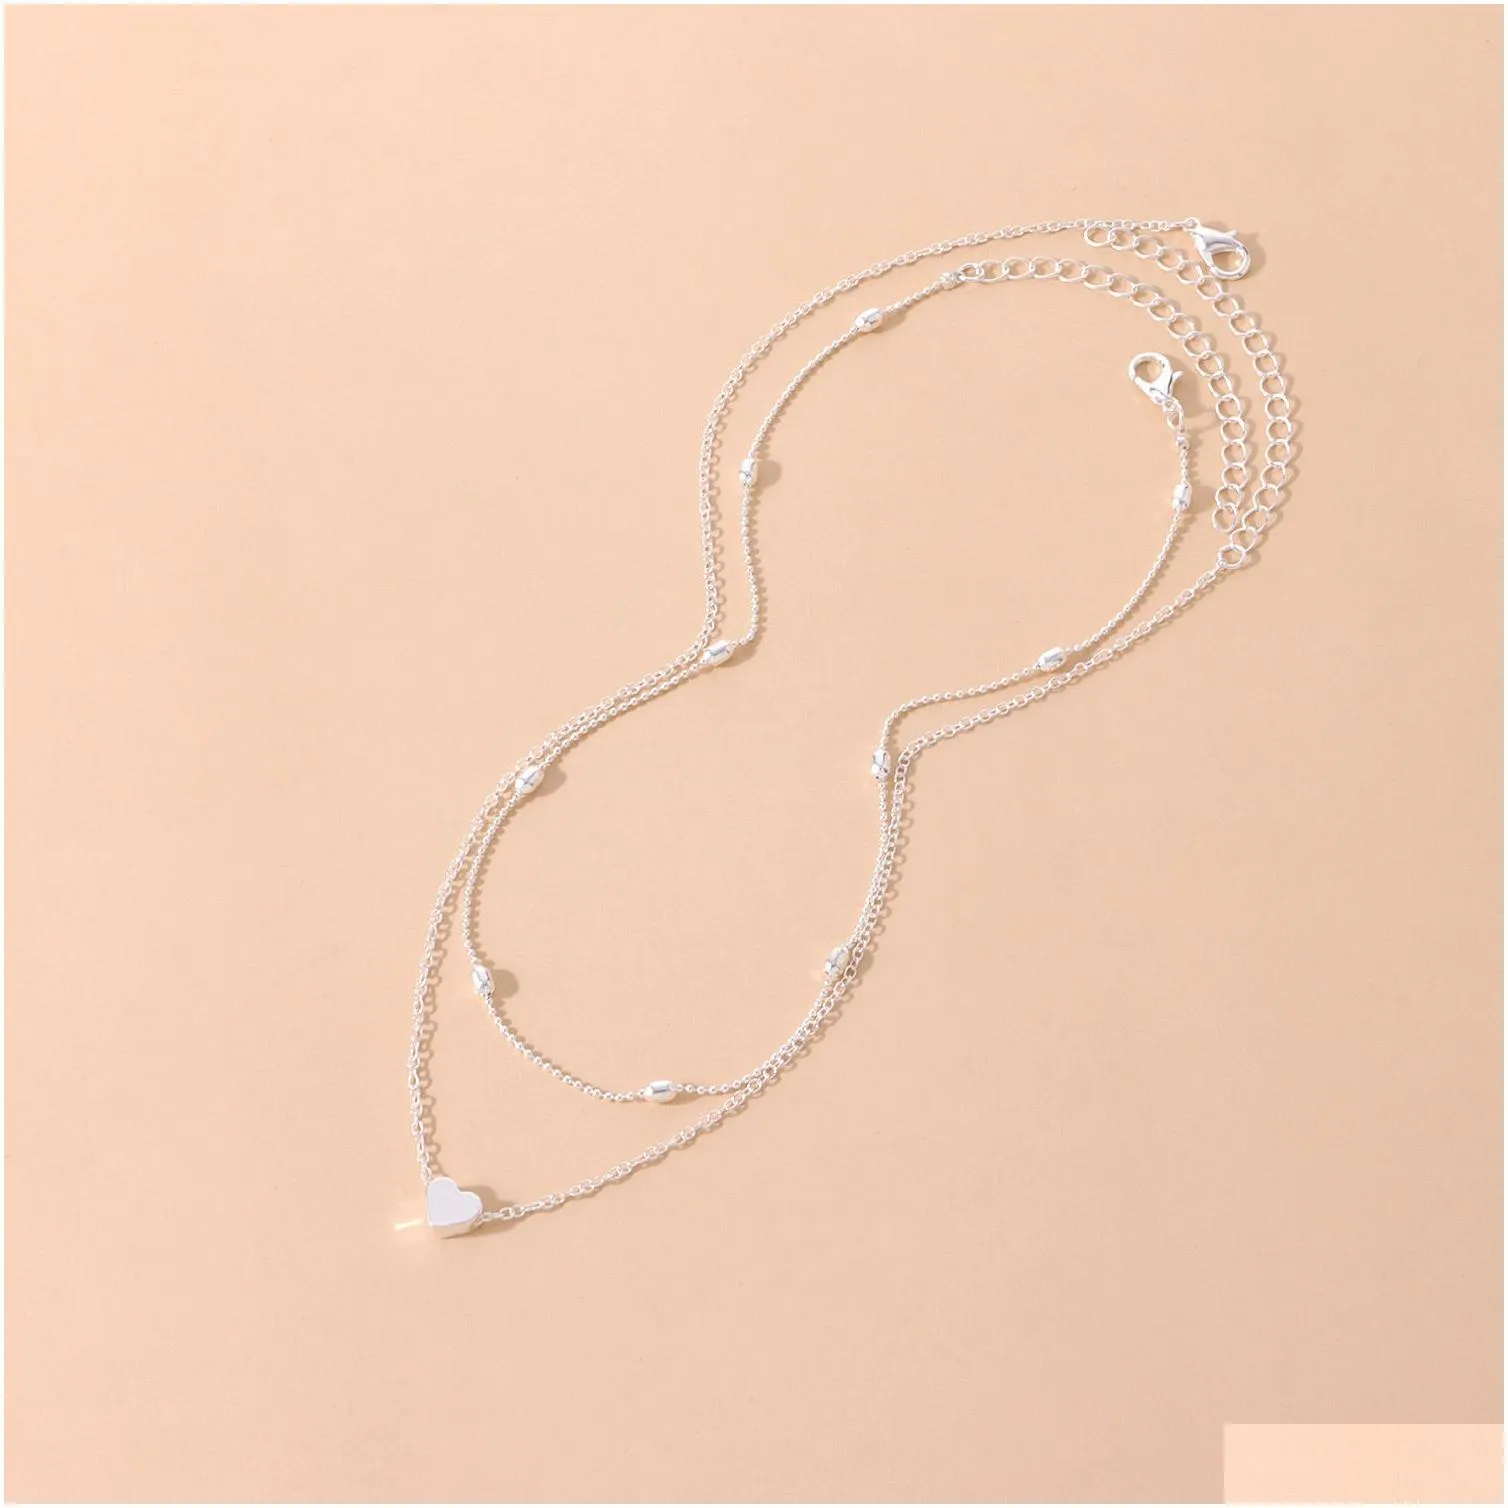 fashion tiny heart pendant necklace for women trendy simple gold silver color chain choker girls party jewelry gift